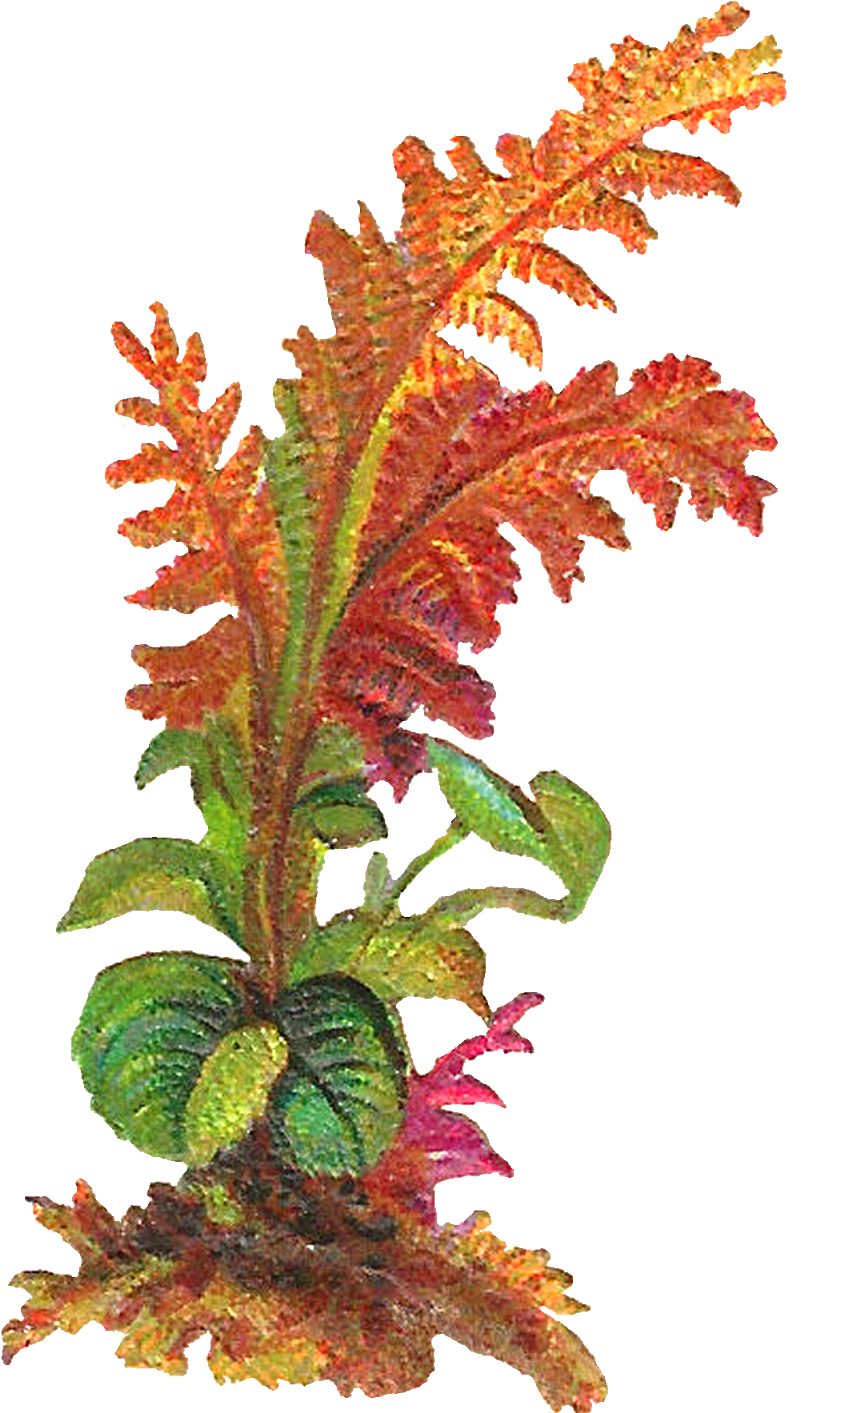 The Second Digital Leaves Download Is Also Designed - The Second Digital Leaves Download Is Also Designed (1003x1600)